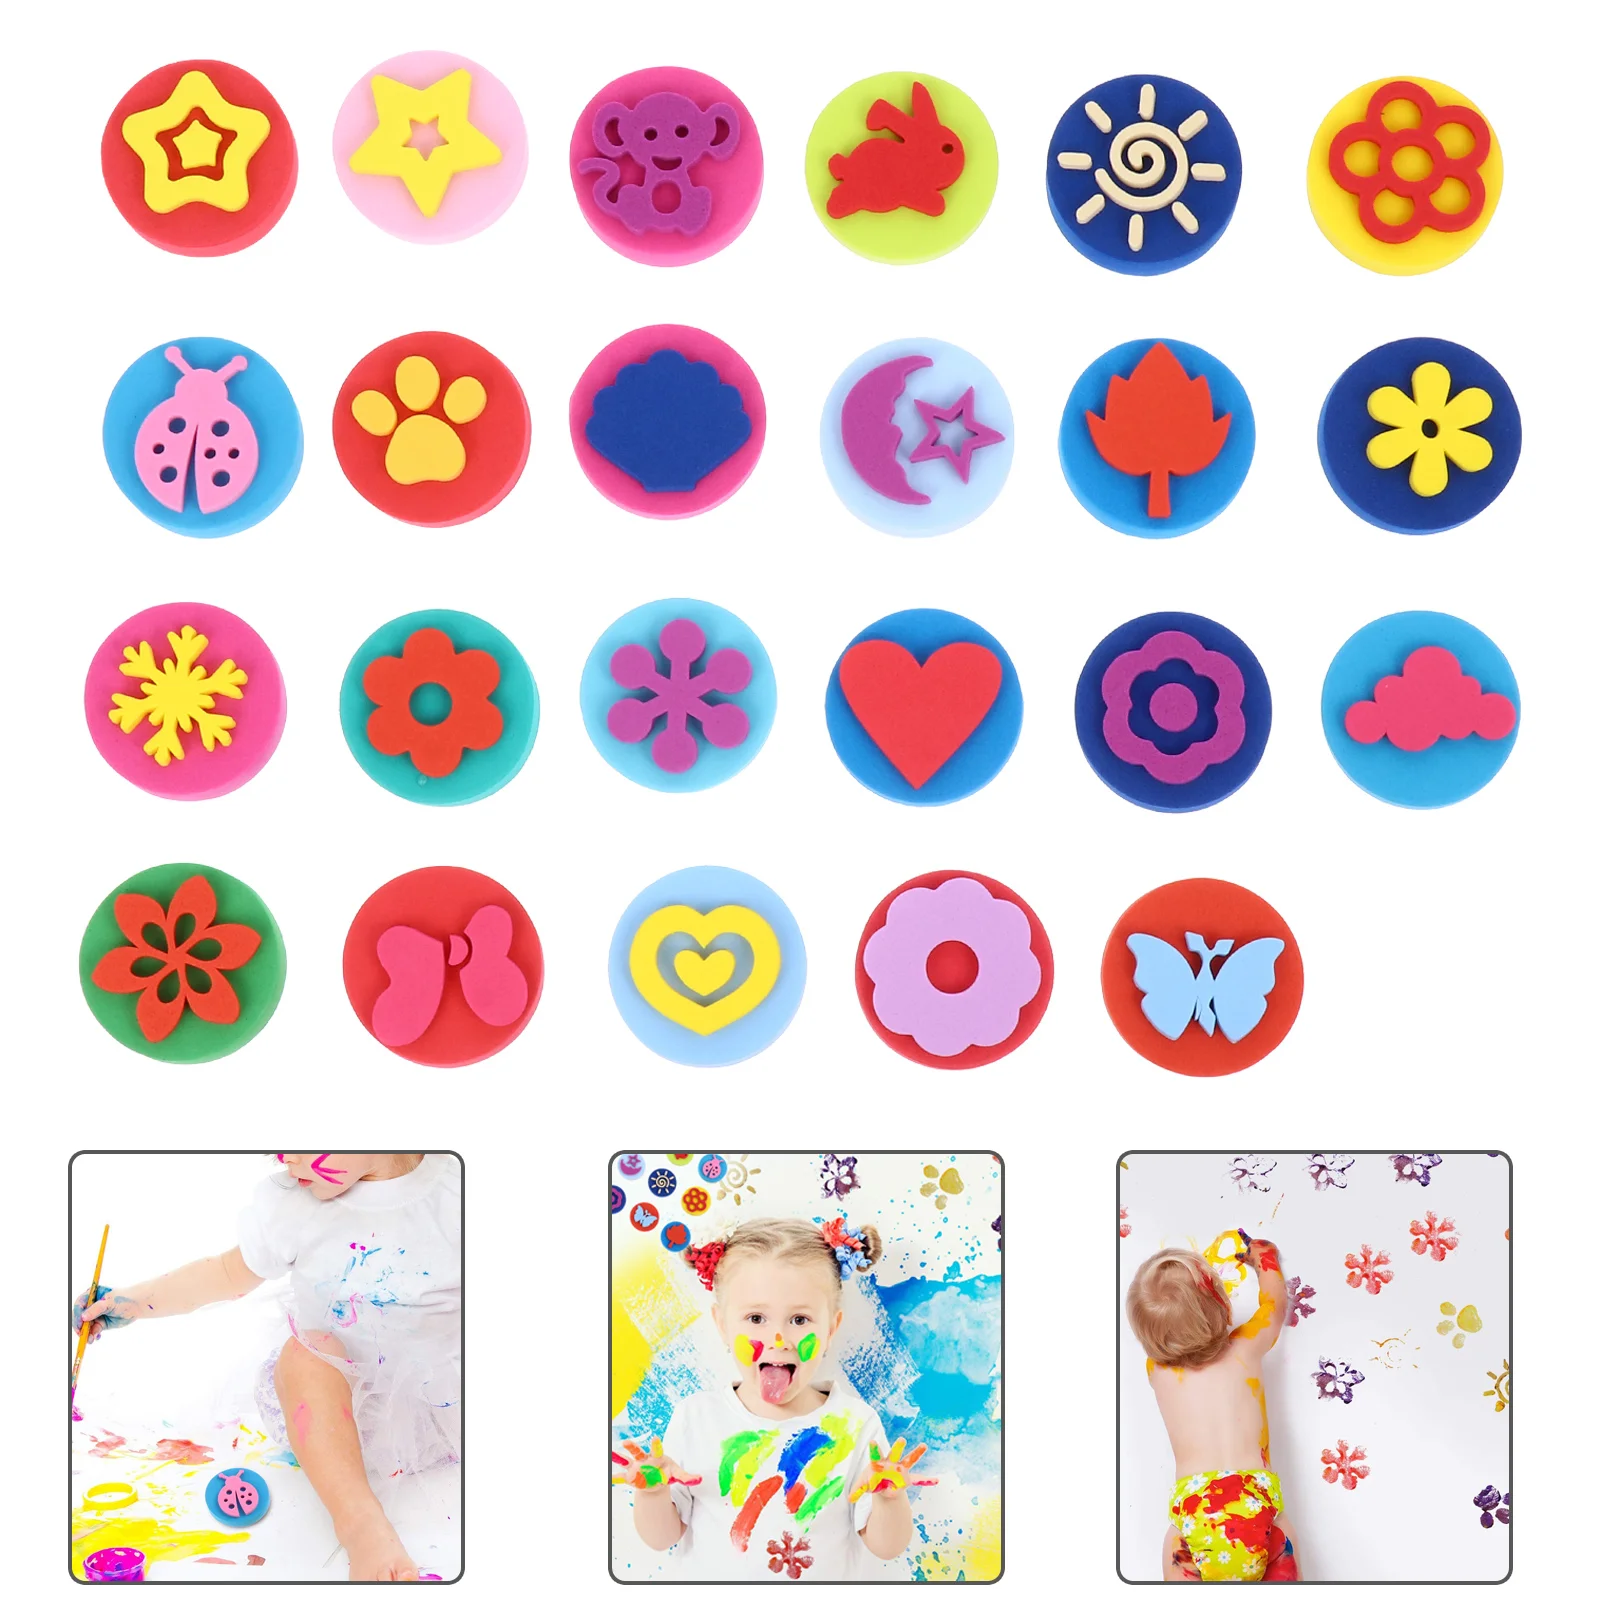 

23pcs Painting Sponges Stamper EVA Craft Painting Sponges Double- sided Cartoon Painting Stamps Early Learning Drawing Tools